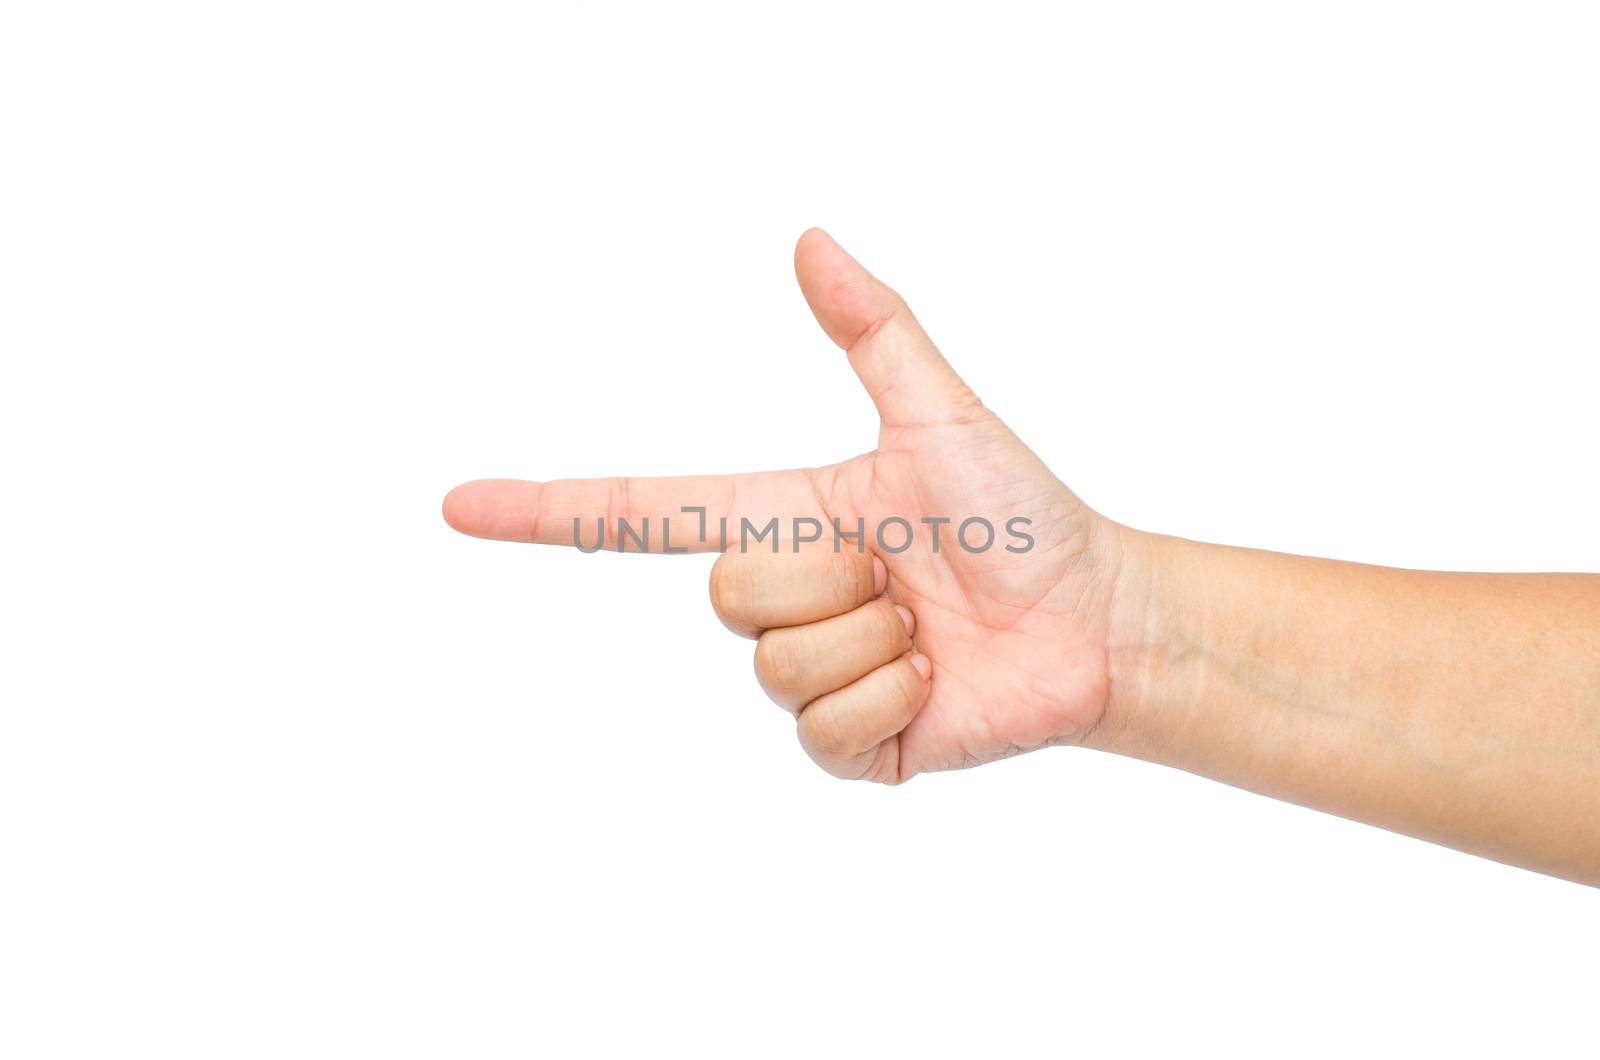 Pointing hand (or shooting or aiming) isolated on a white backgr by photobyphotoboy